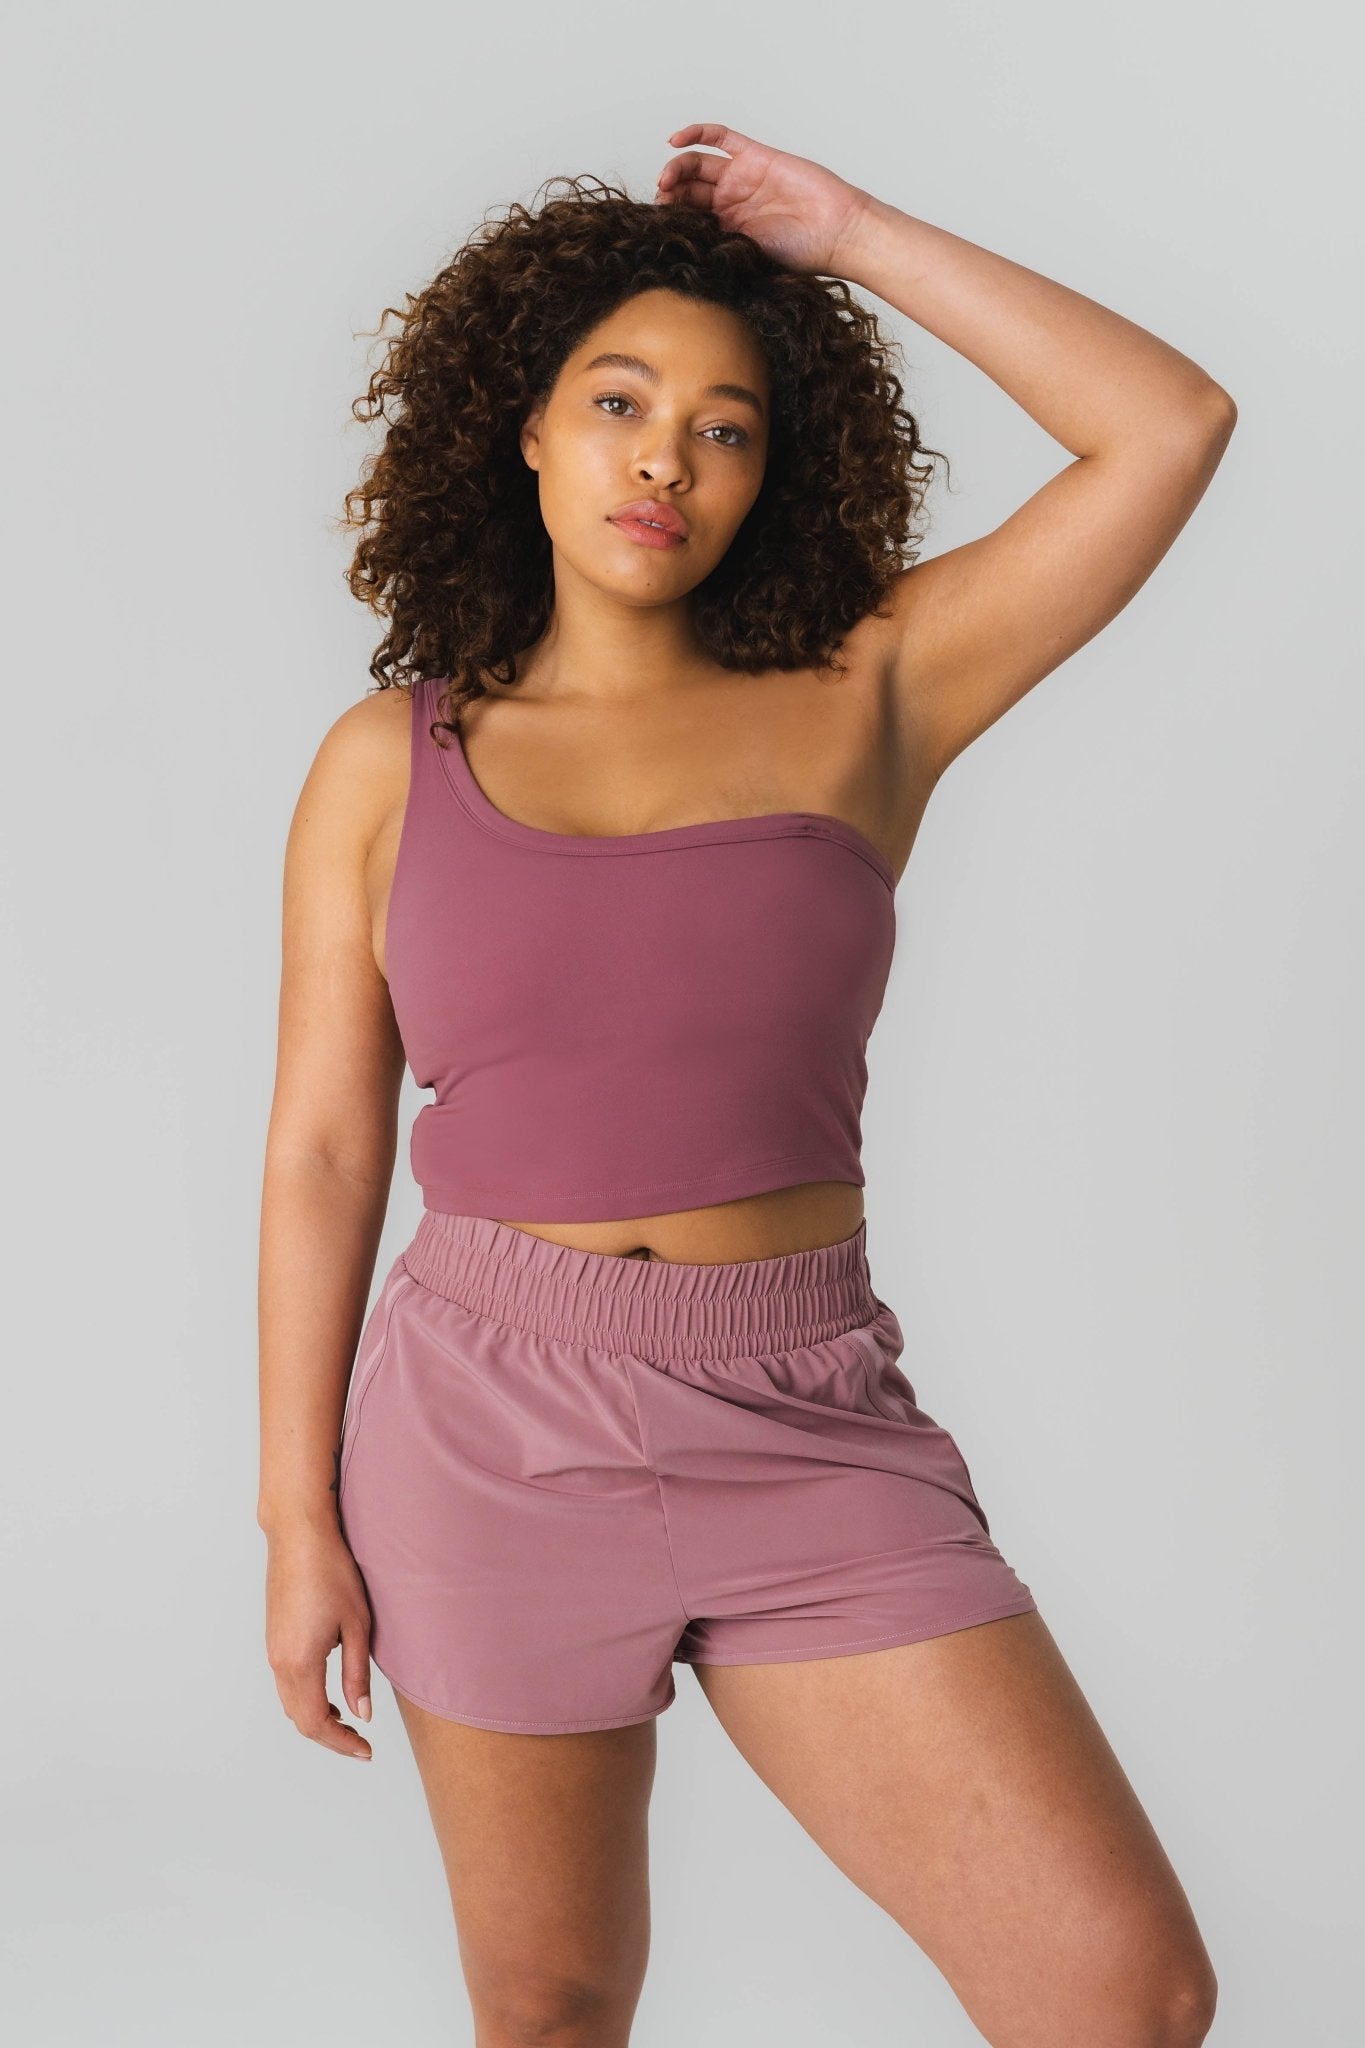 Cloud II Asym Tank - Mauve, Women's Tops from Vitality Athletic and Athleisure Wear